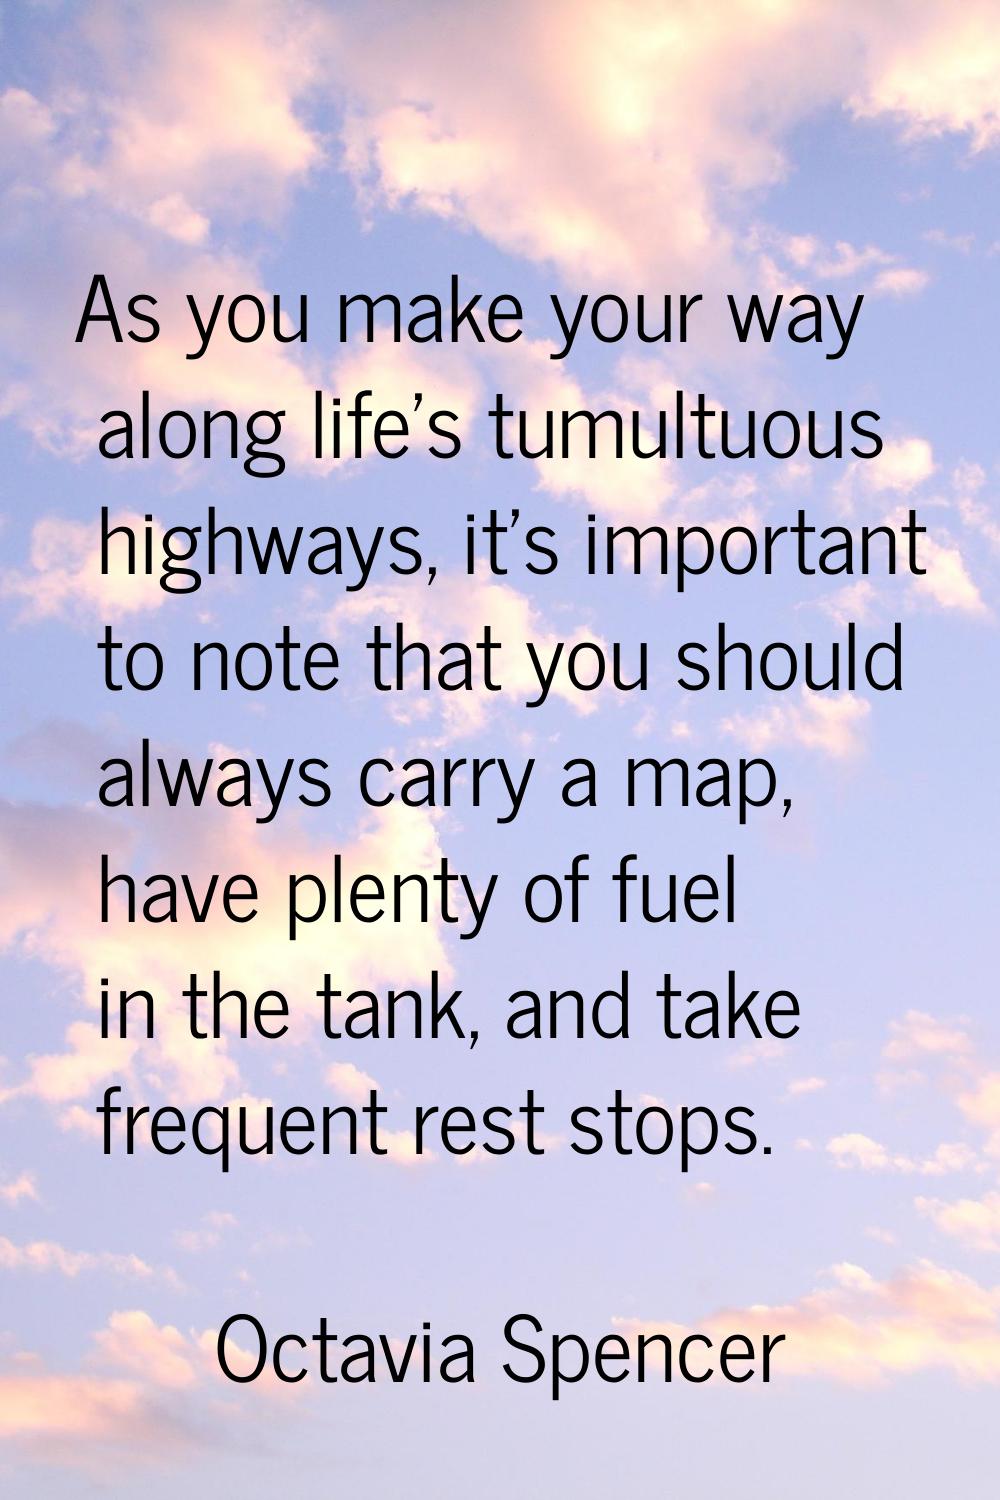 As you make your way along life's tumultuous highways, it's important to note that you should alway